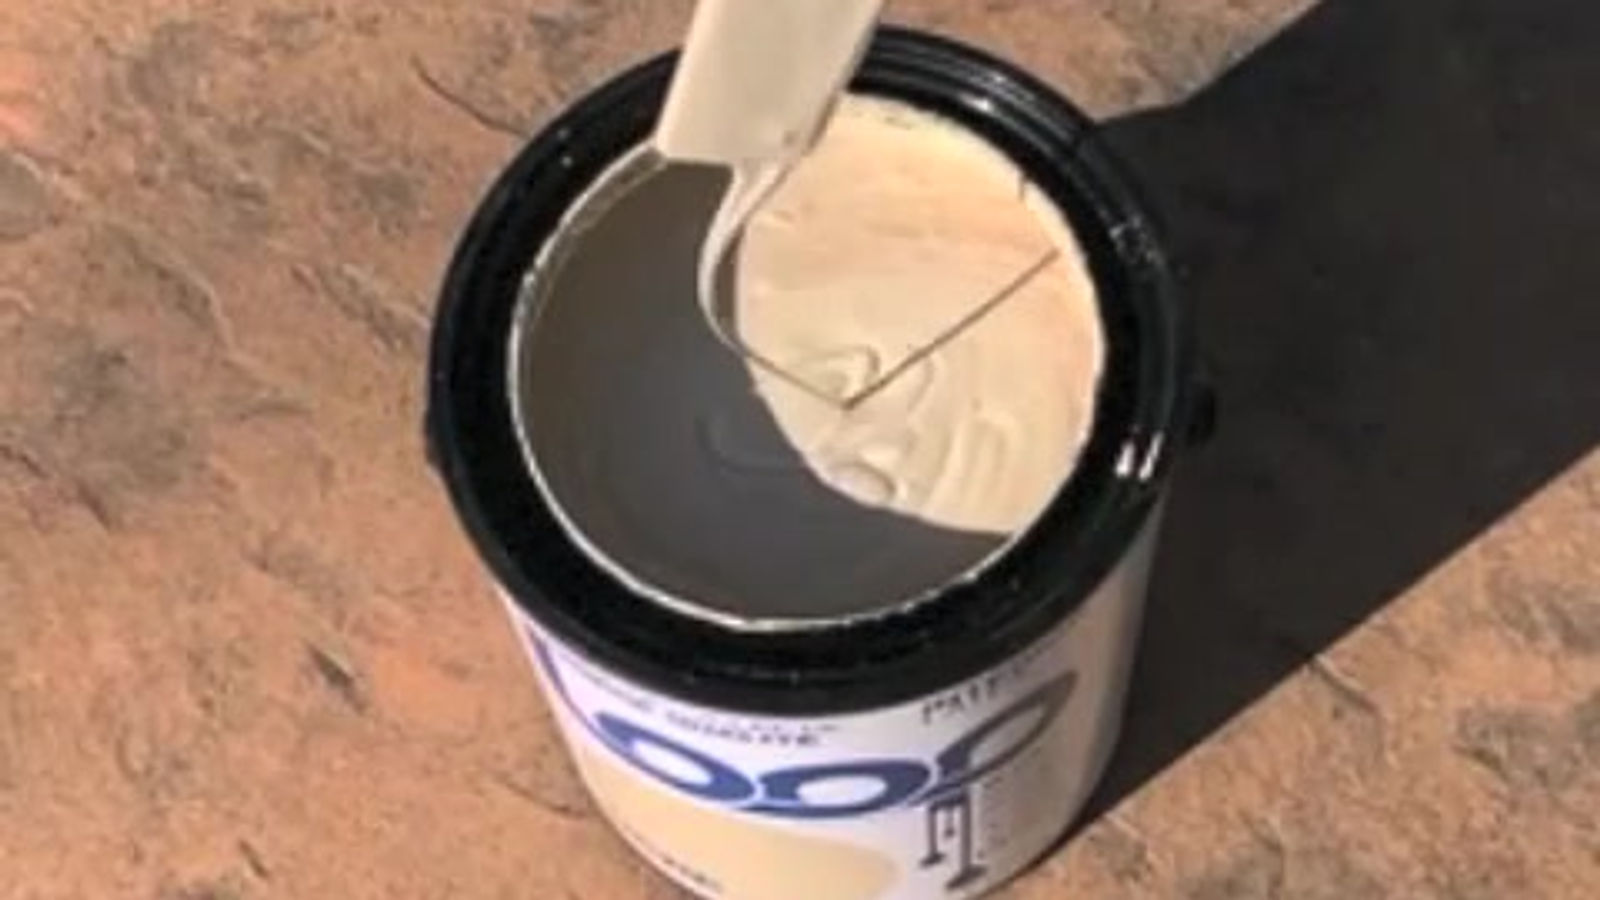 Why is Loop paint so thick?